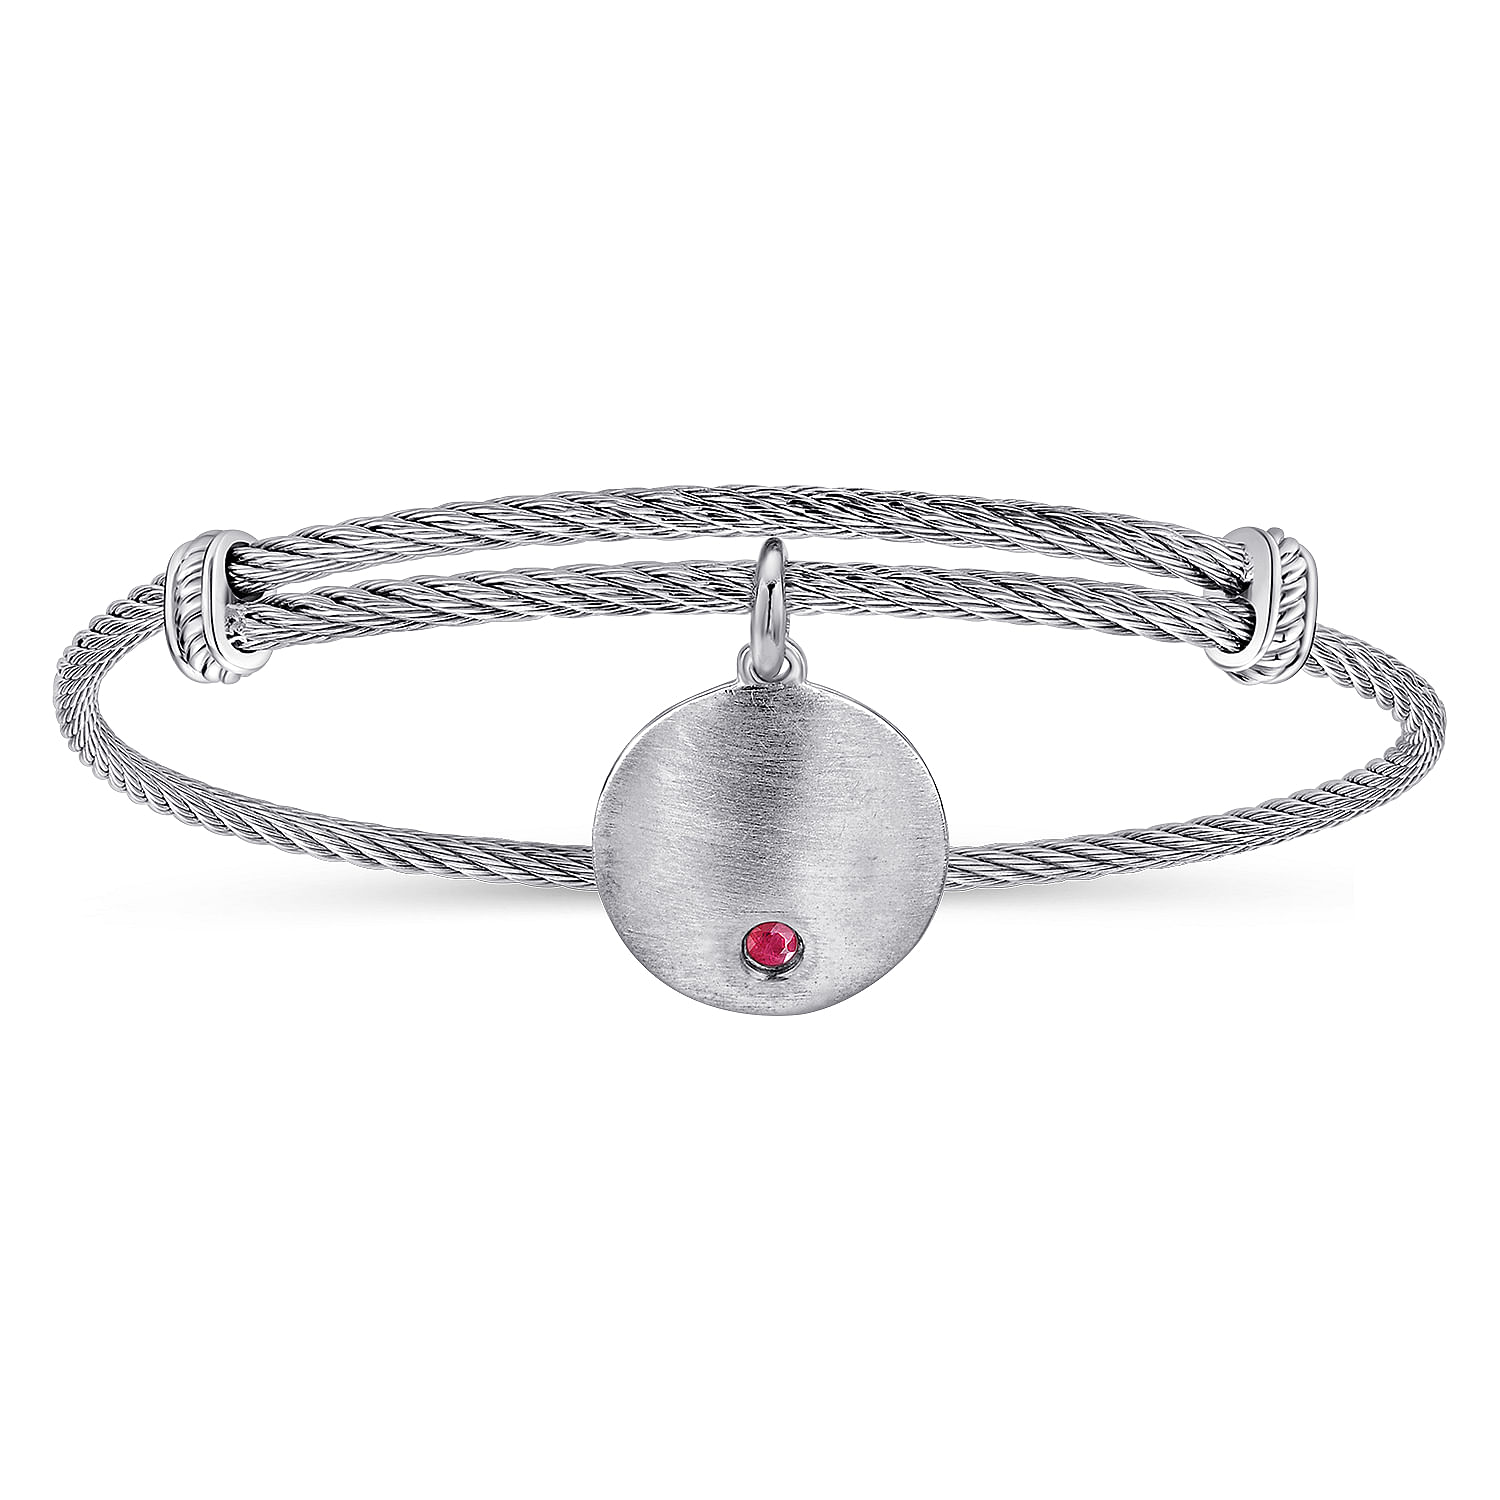 Adjustable Stainless Steel Bangle with Round Sterling Silver Ruby Stone Disc Charm